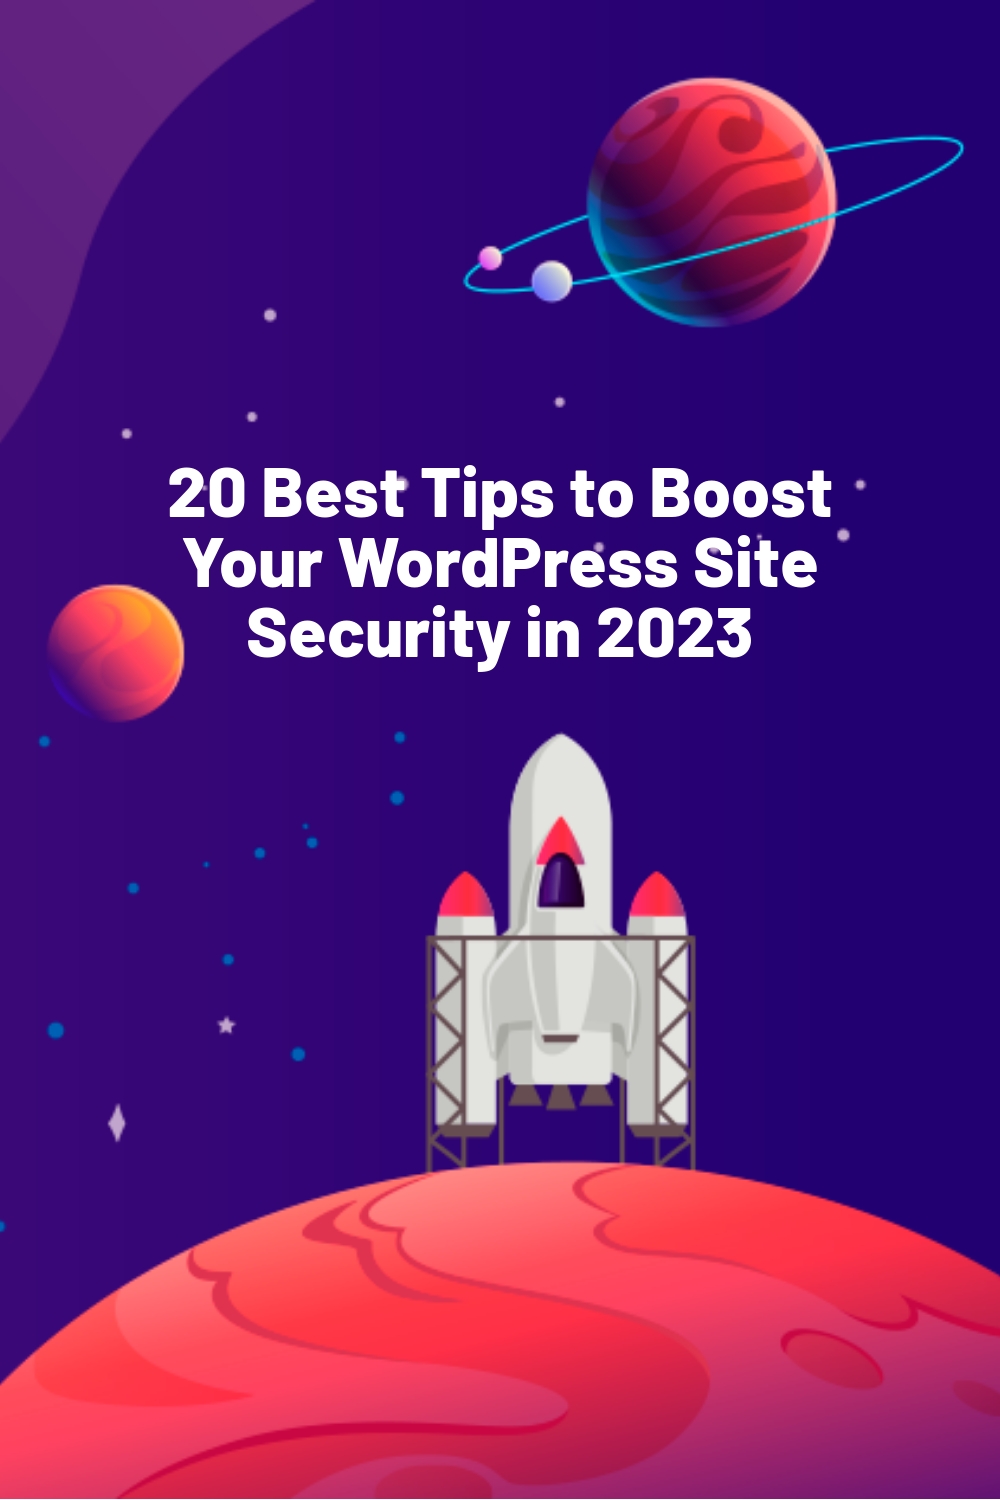 20 Best Tips to Boost Your WordPress Site Security in 2023